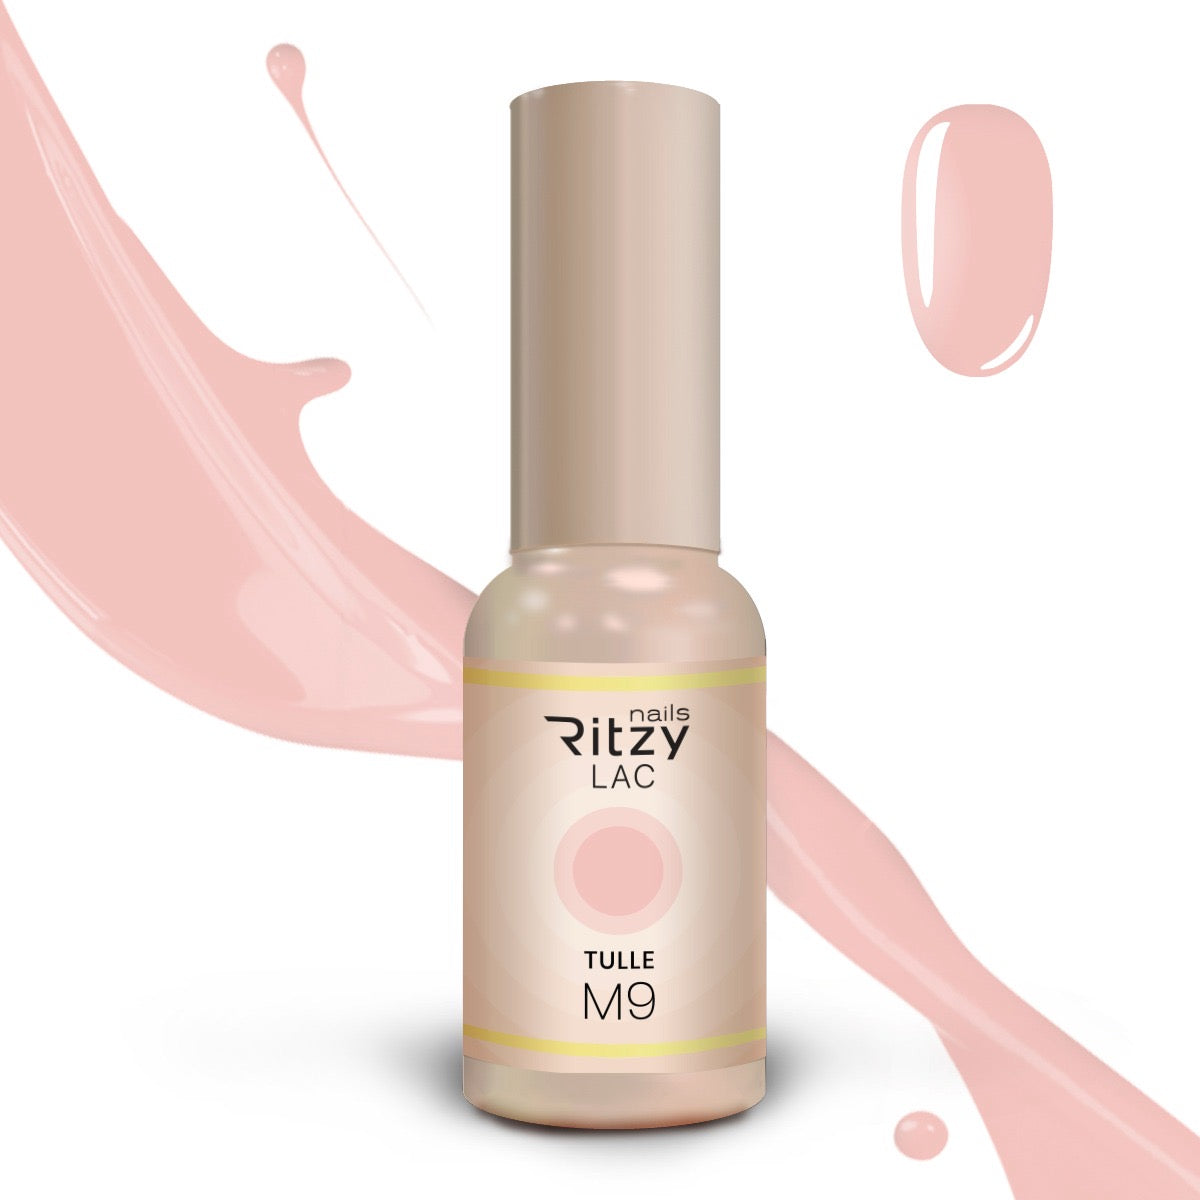 Ritzy Lac Tulle M9